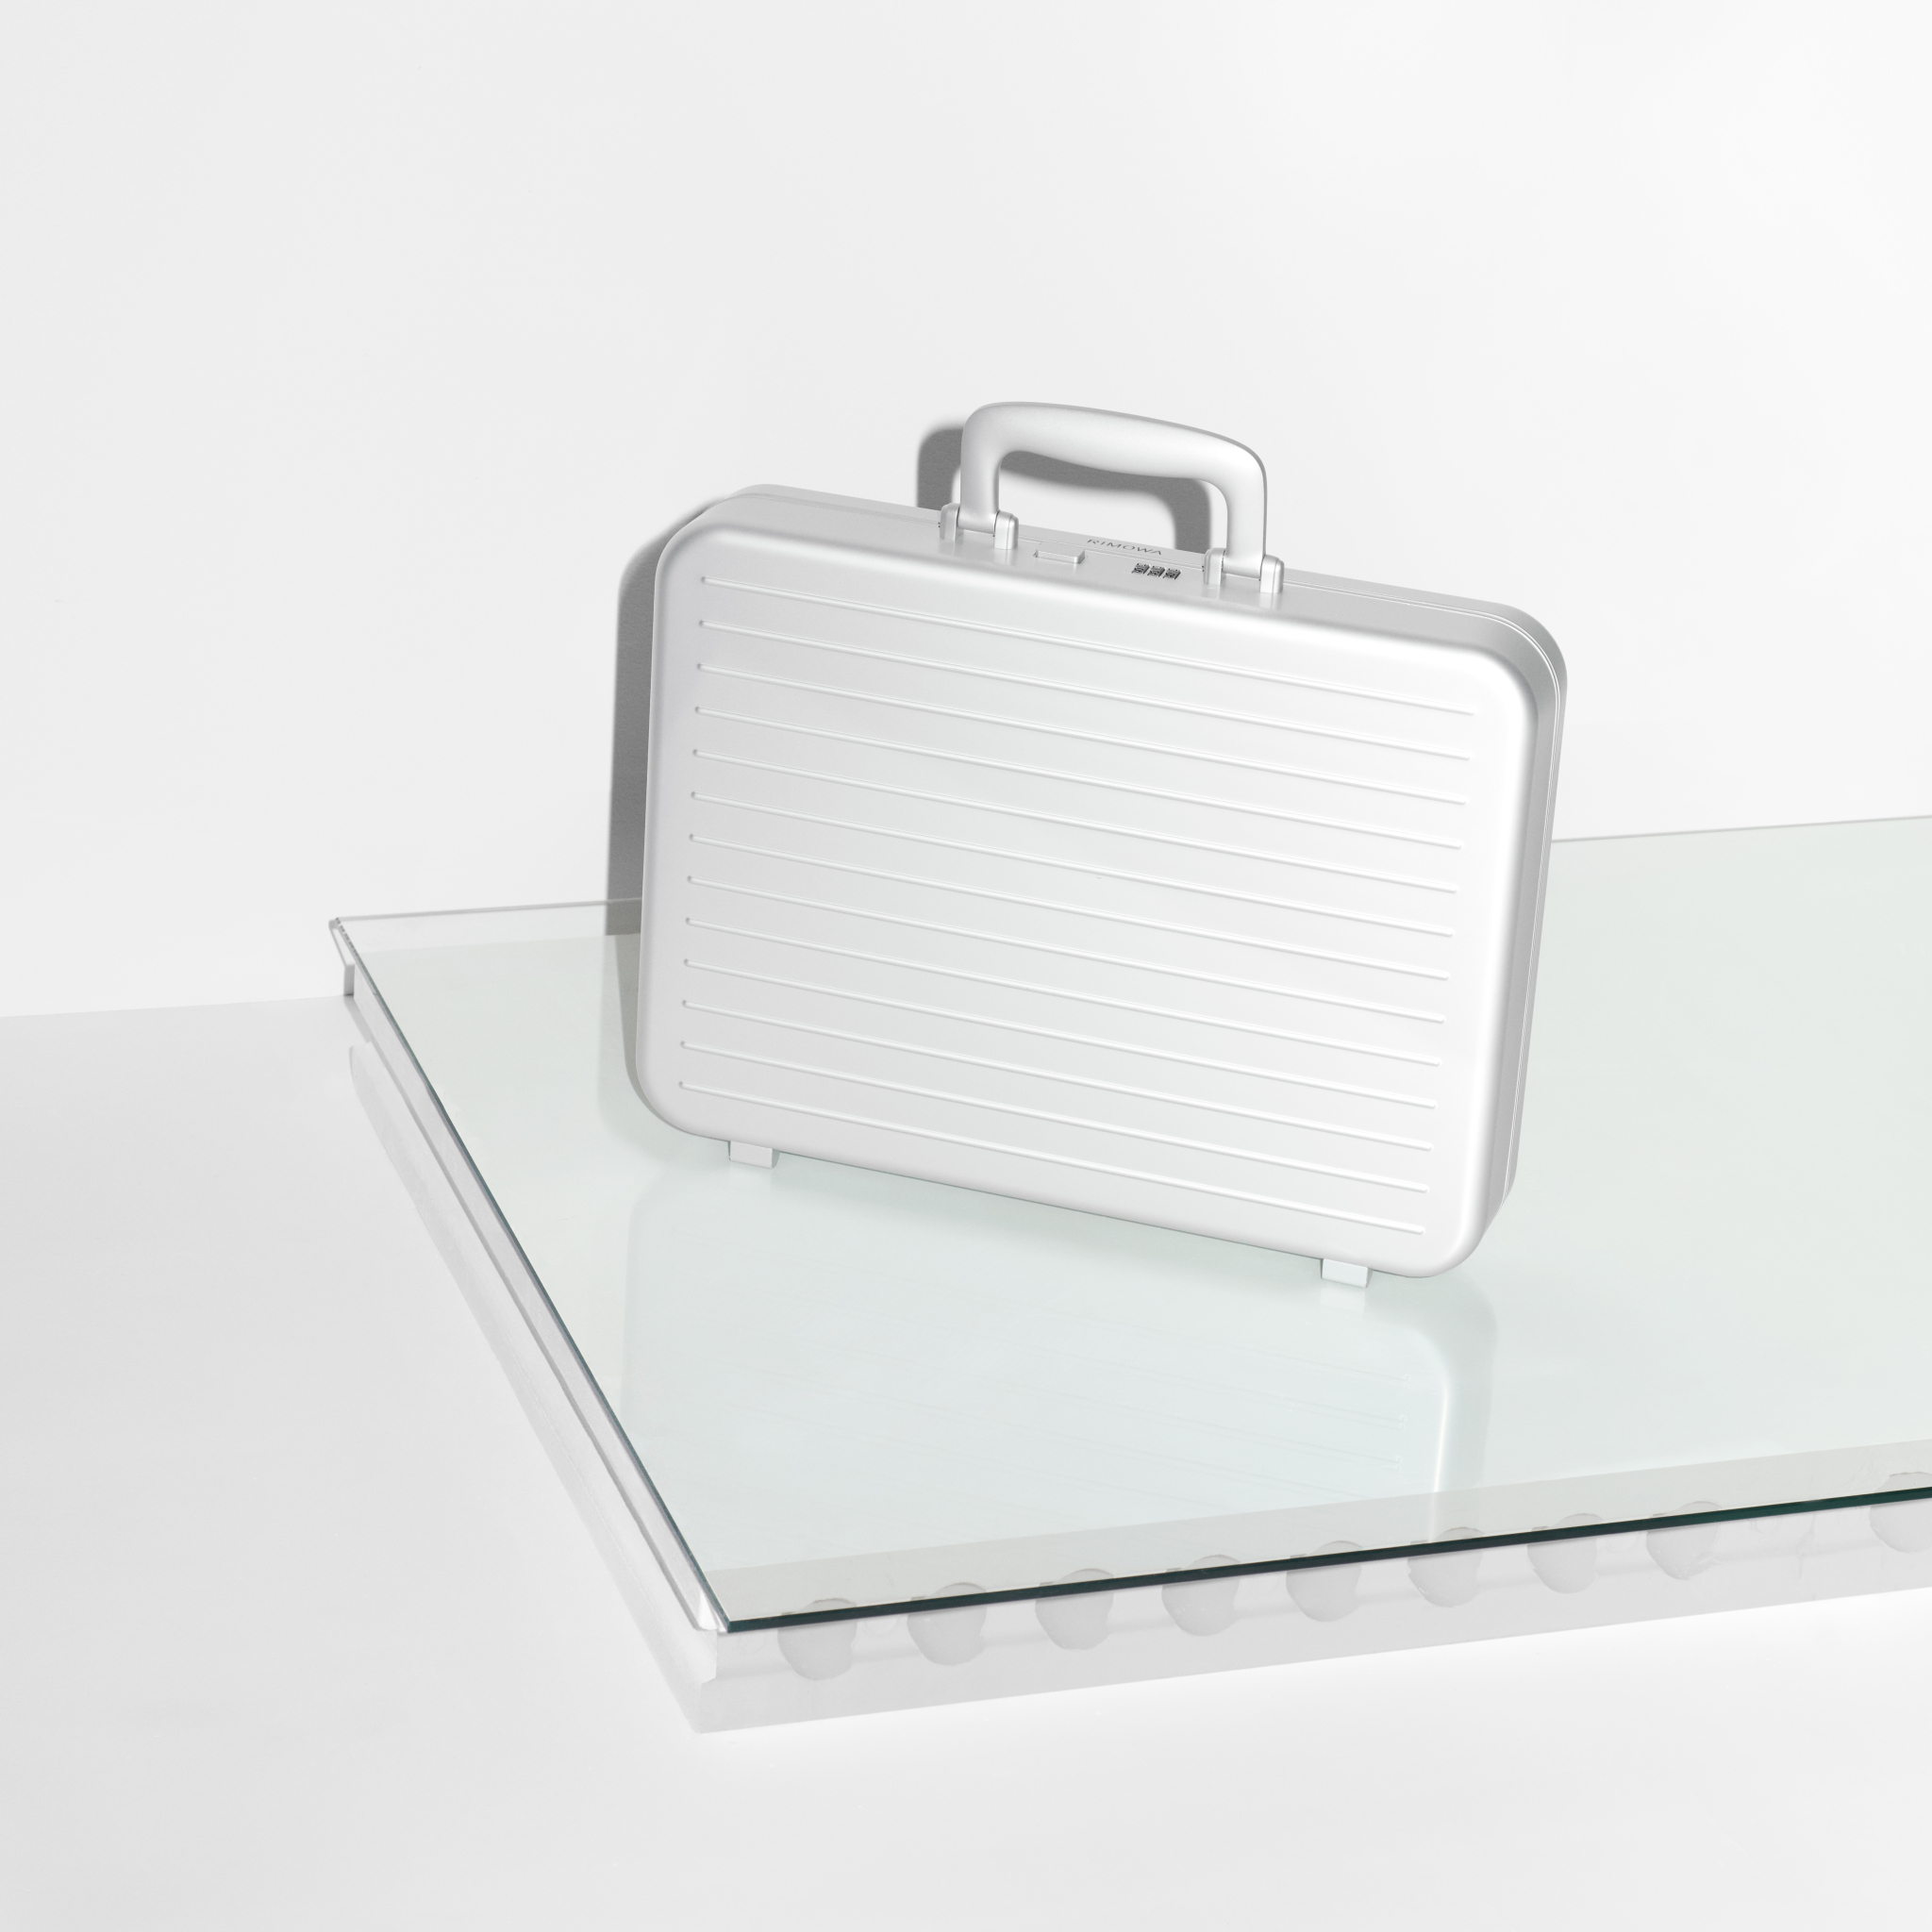 Rimowa's New Cross-Product Collection is Perfect for the Holiday